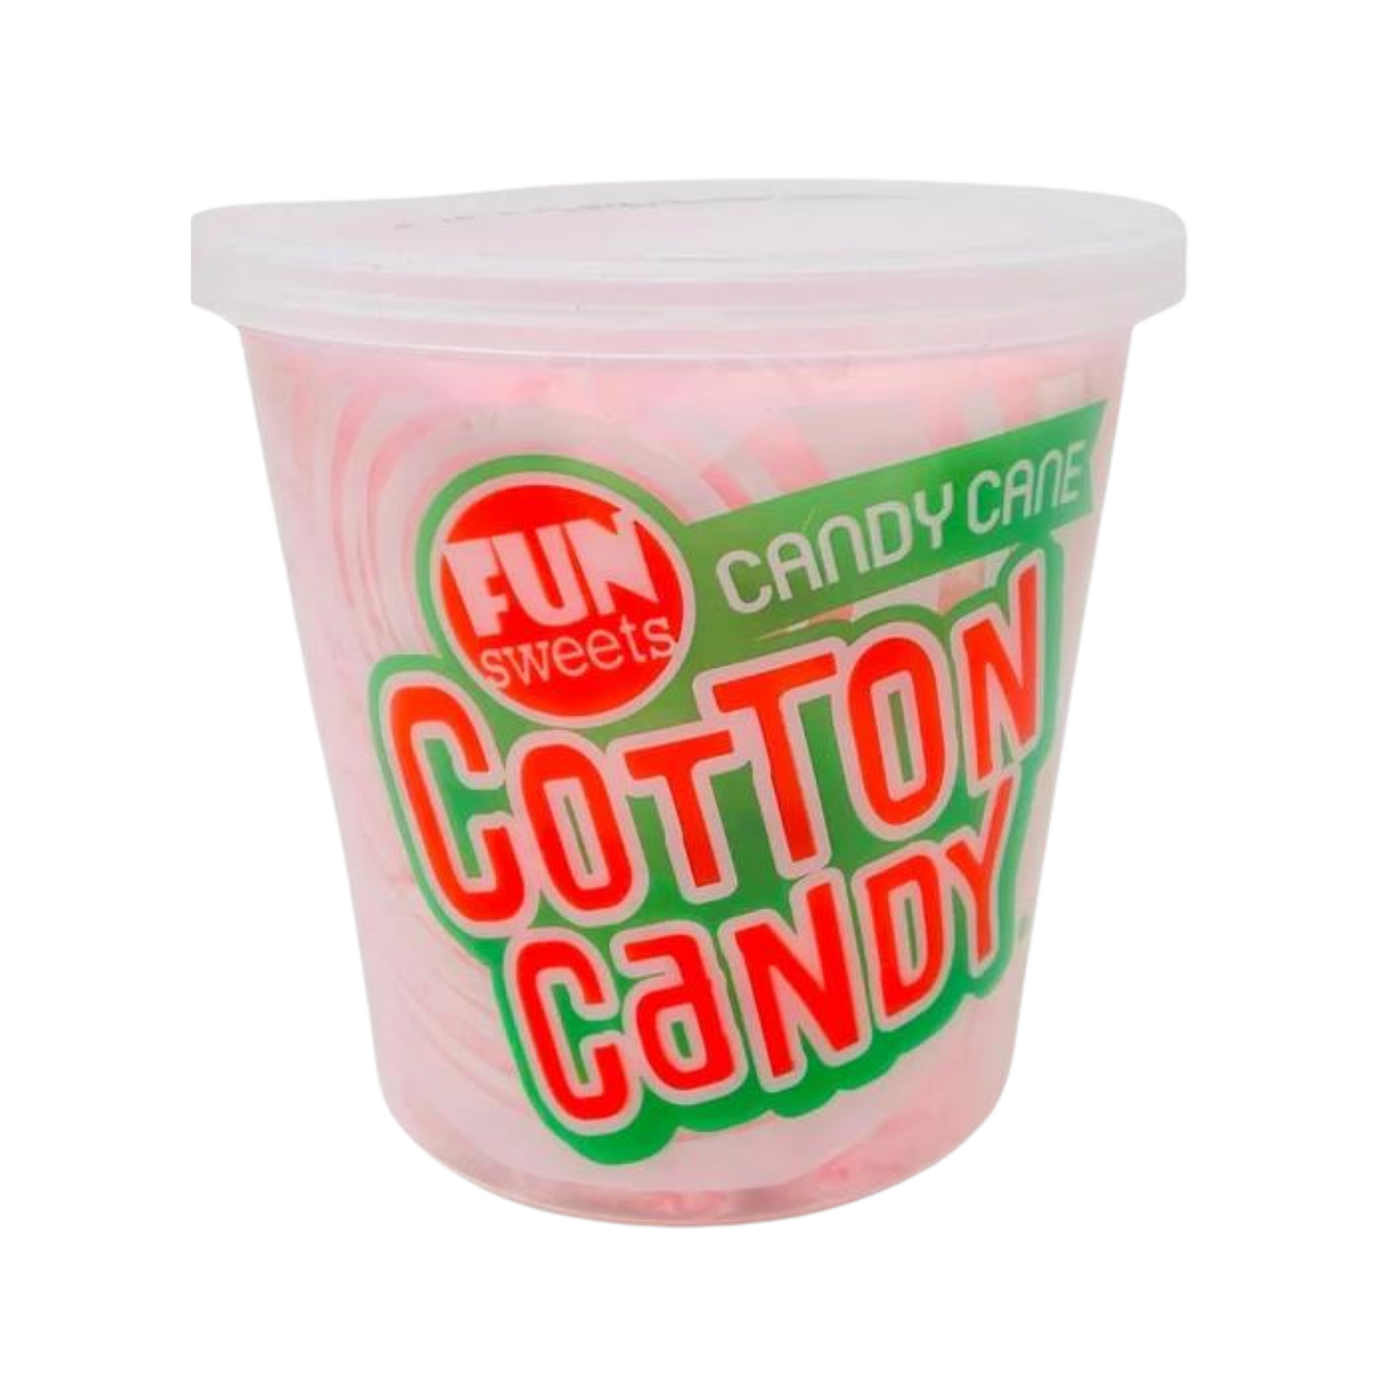 Fun Sweets Cotton Candy - Christmas